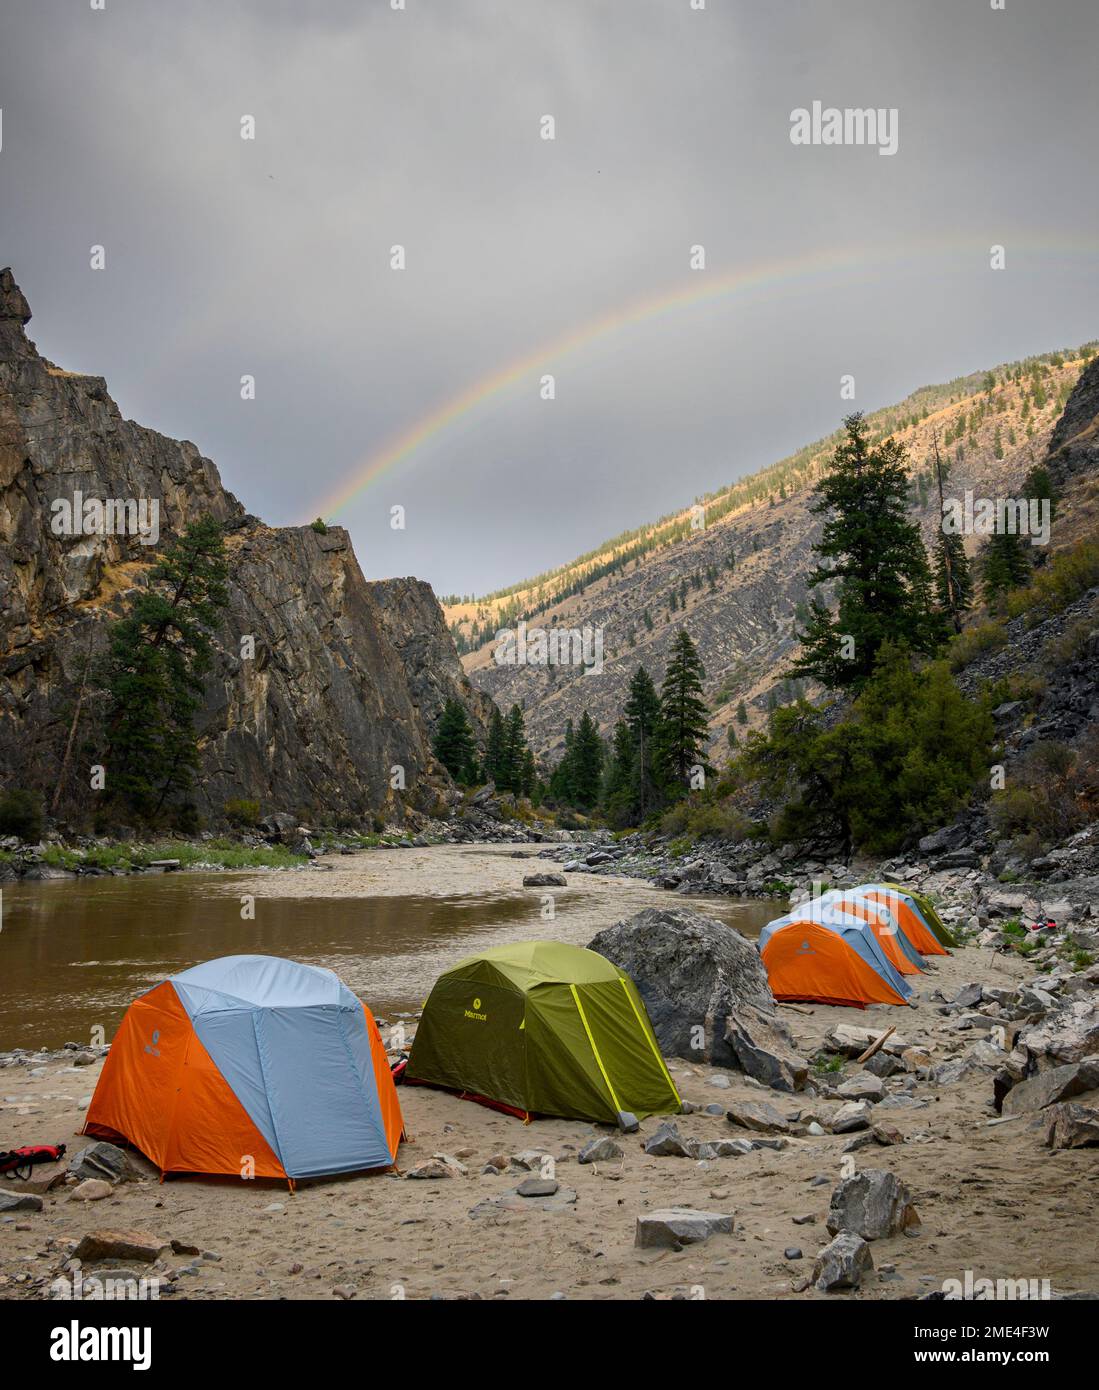 Rainbow over campsite on the Middle Fork Salmon River, Idaho. Stock Photo